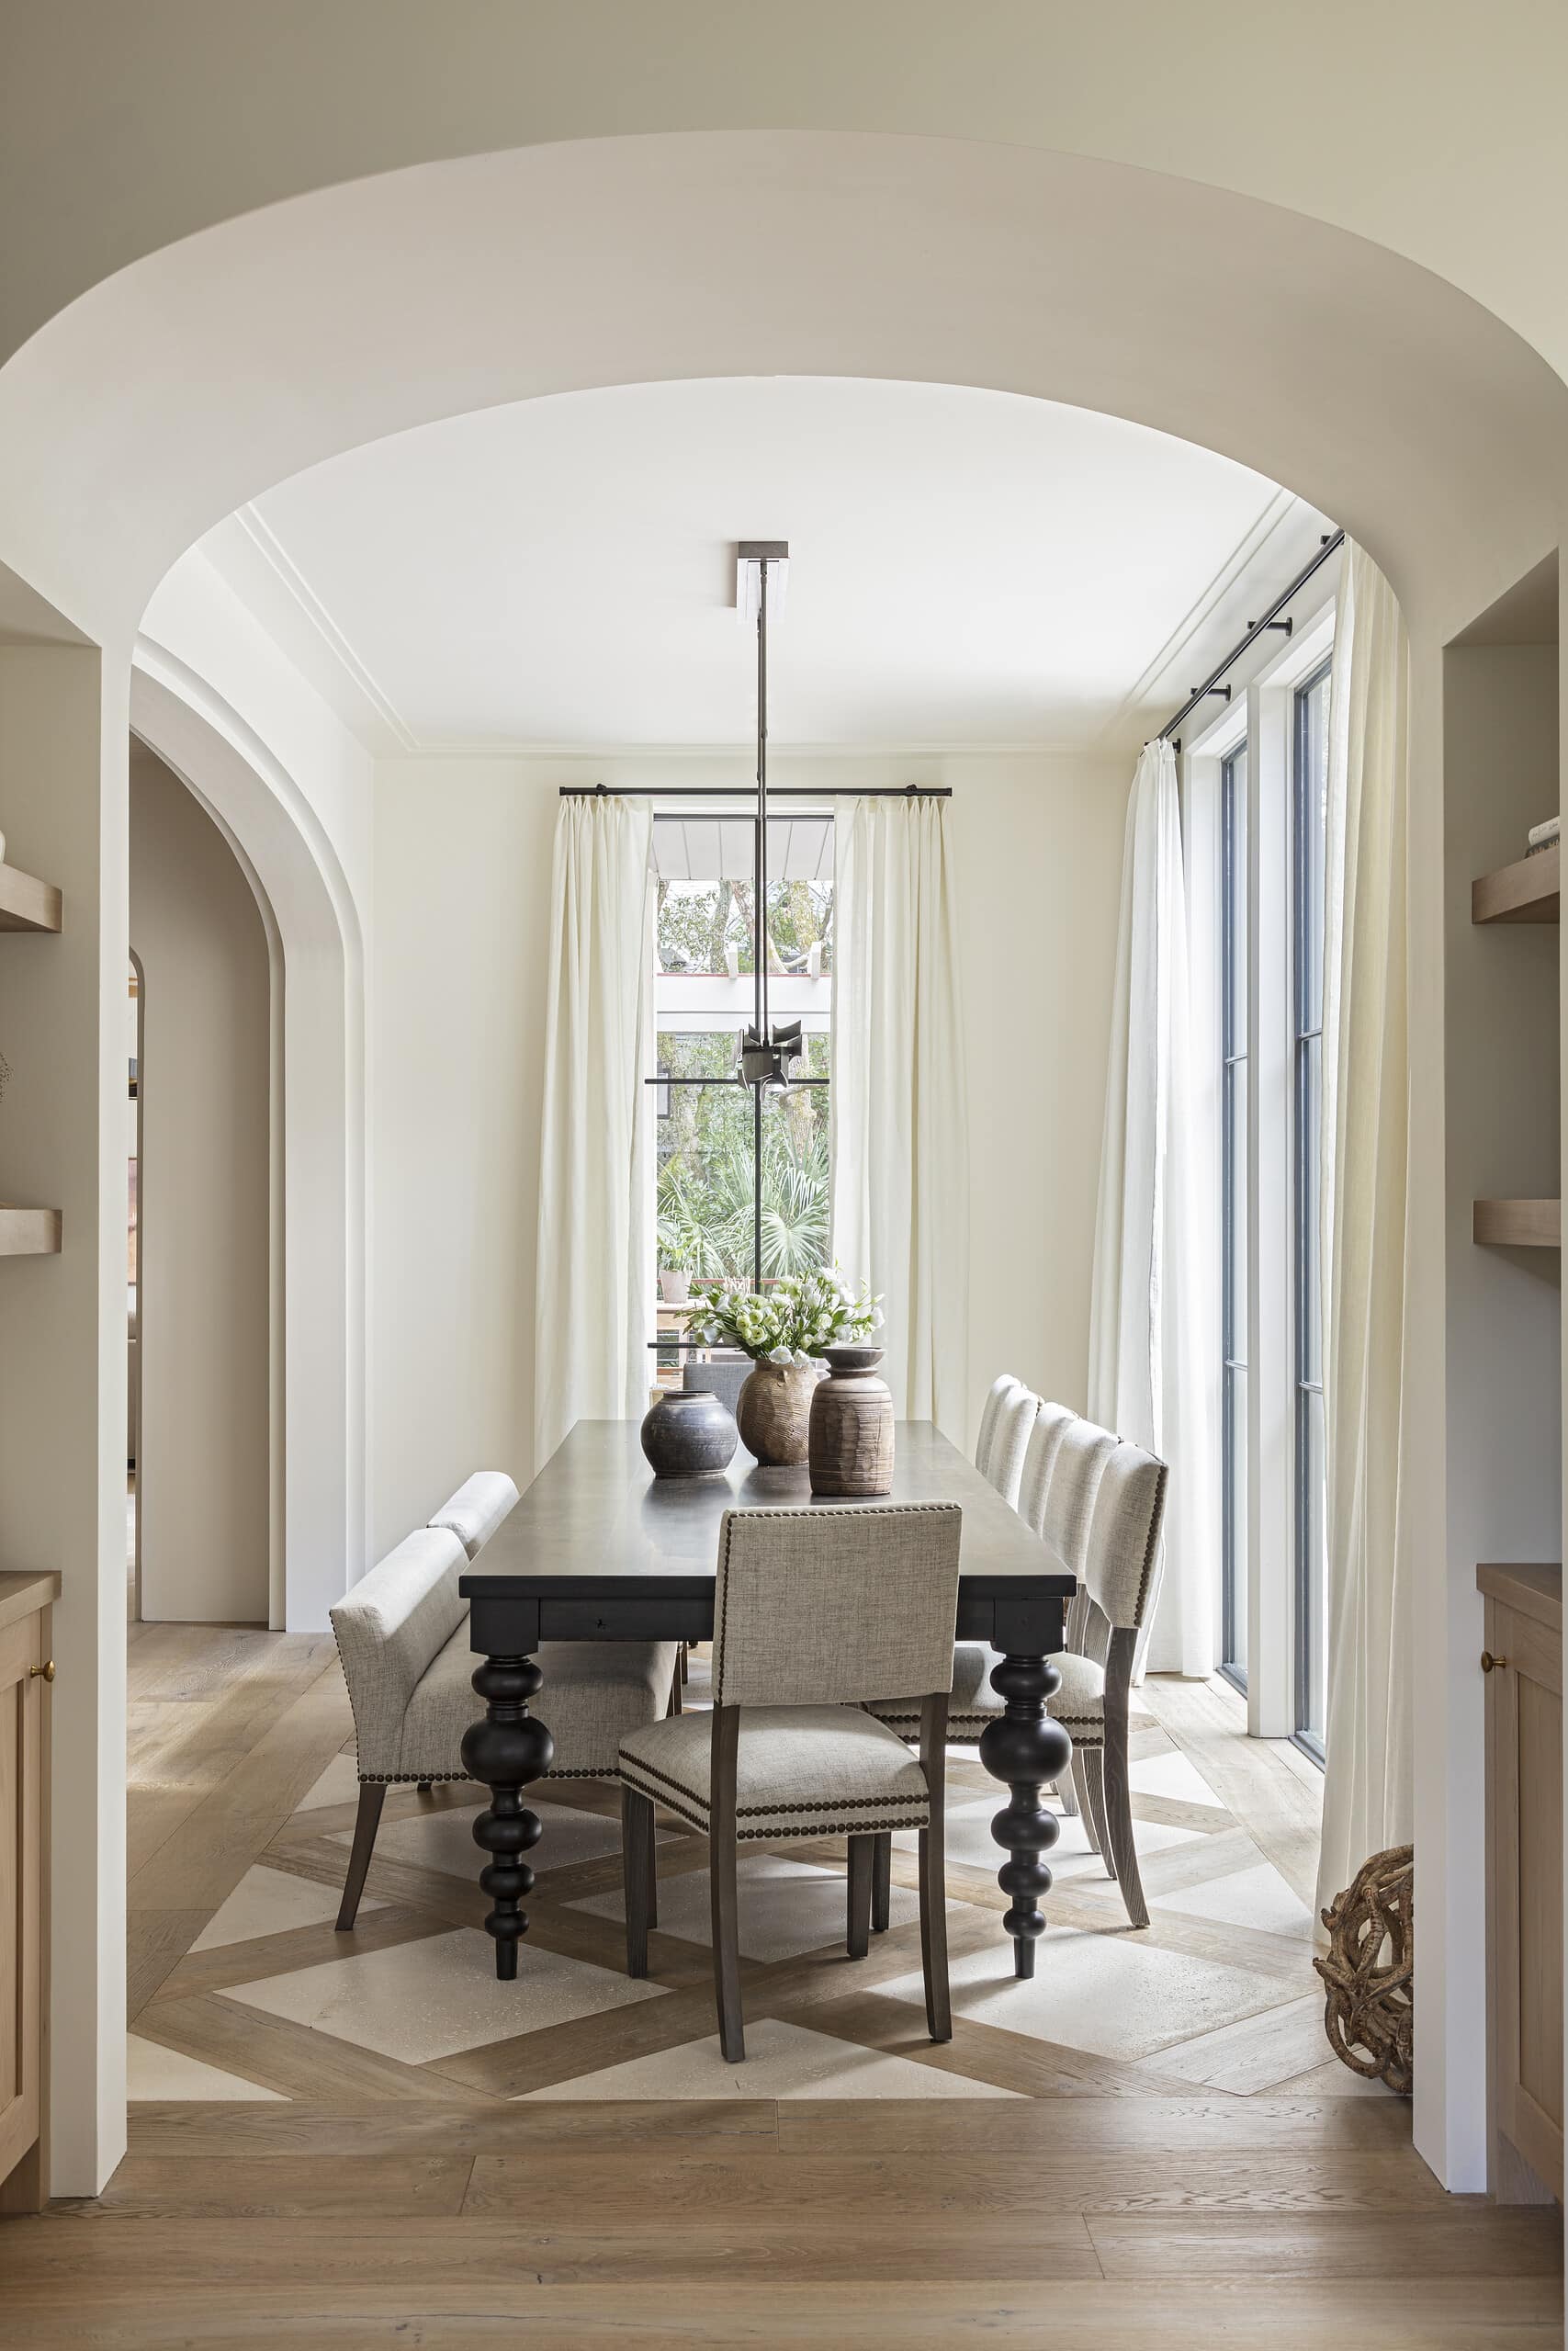 Home tour featuring dining room designed by Margaret Donaldson